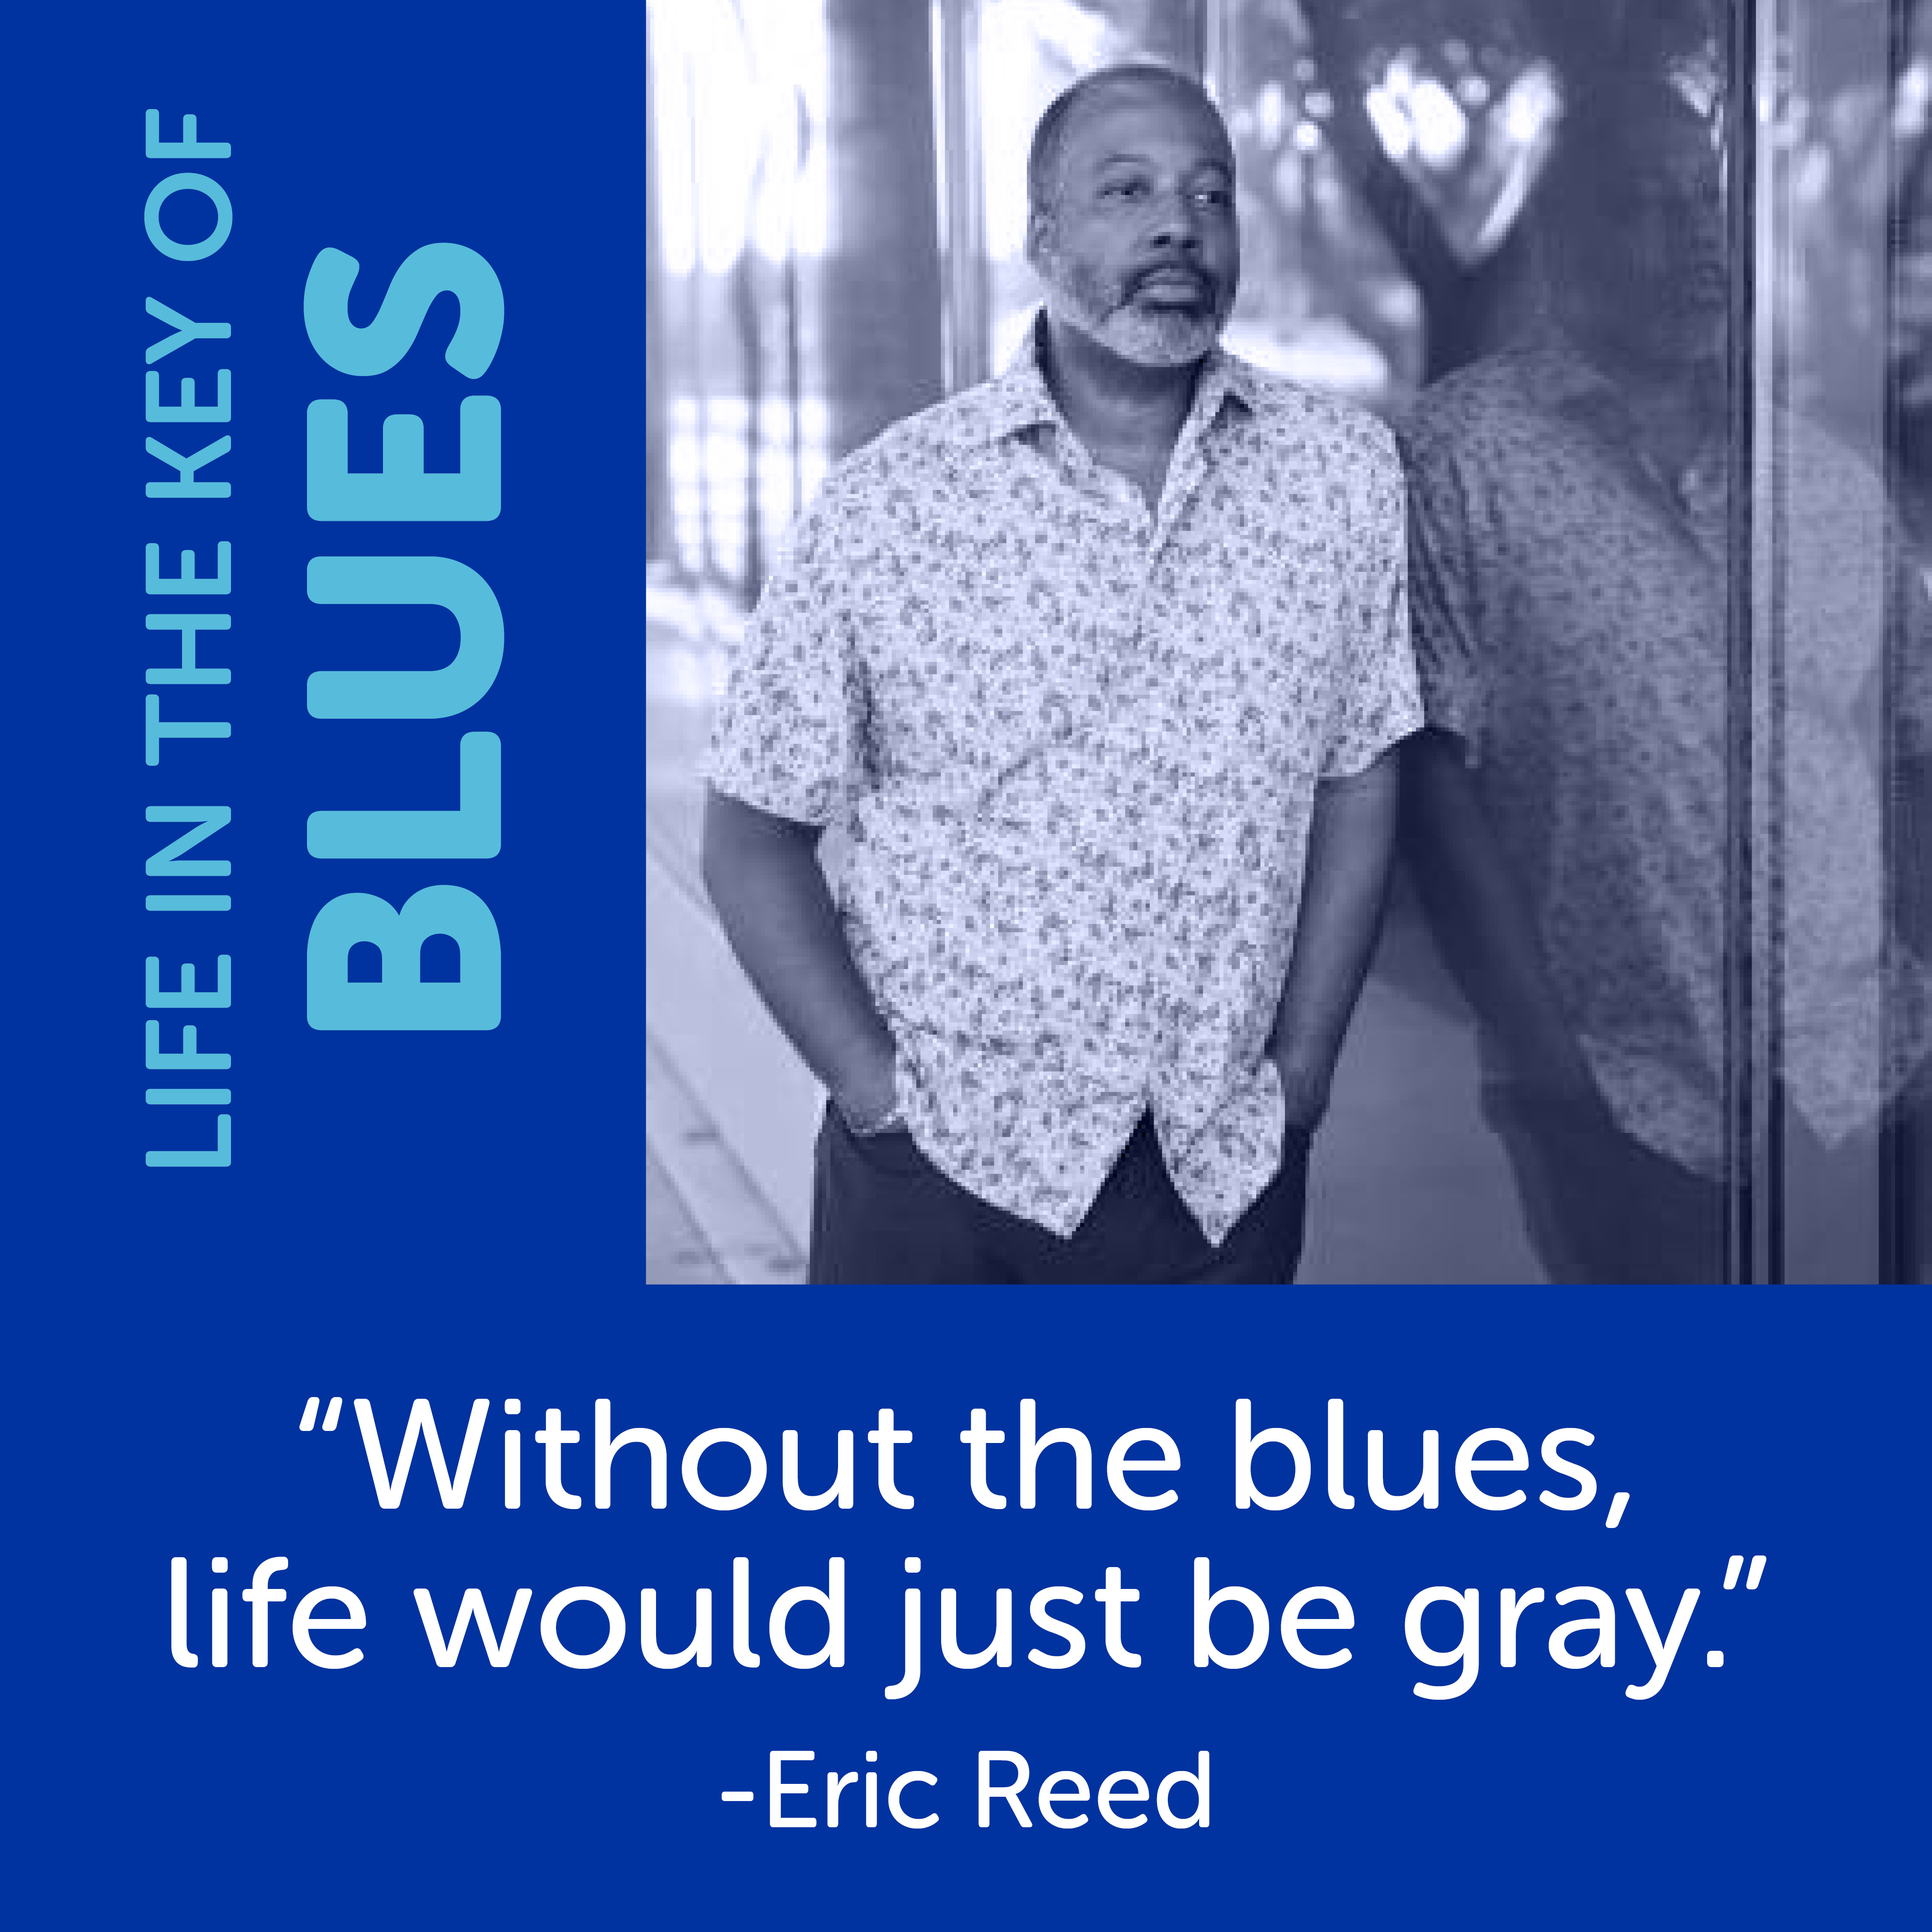 black and white photo of Eric Reed with text on a blue background, "Without the blues, life would just be gray." - Eric Reed